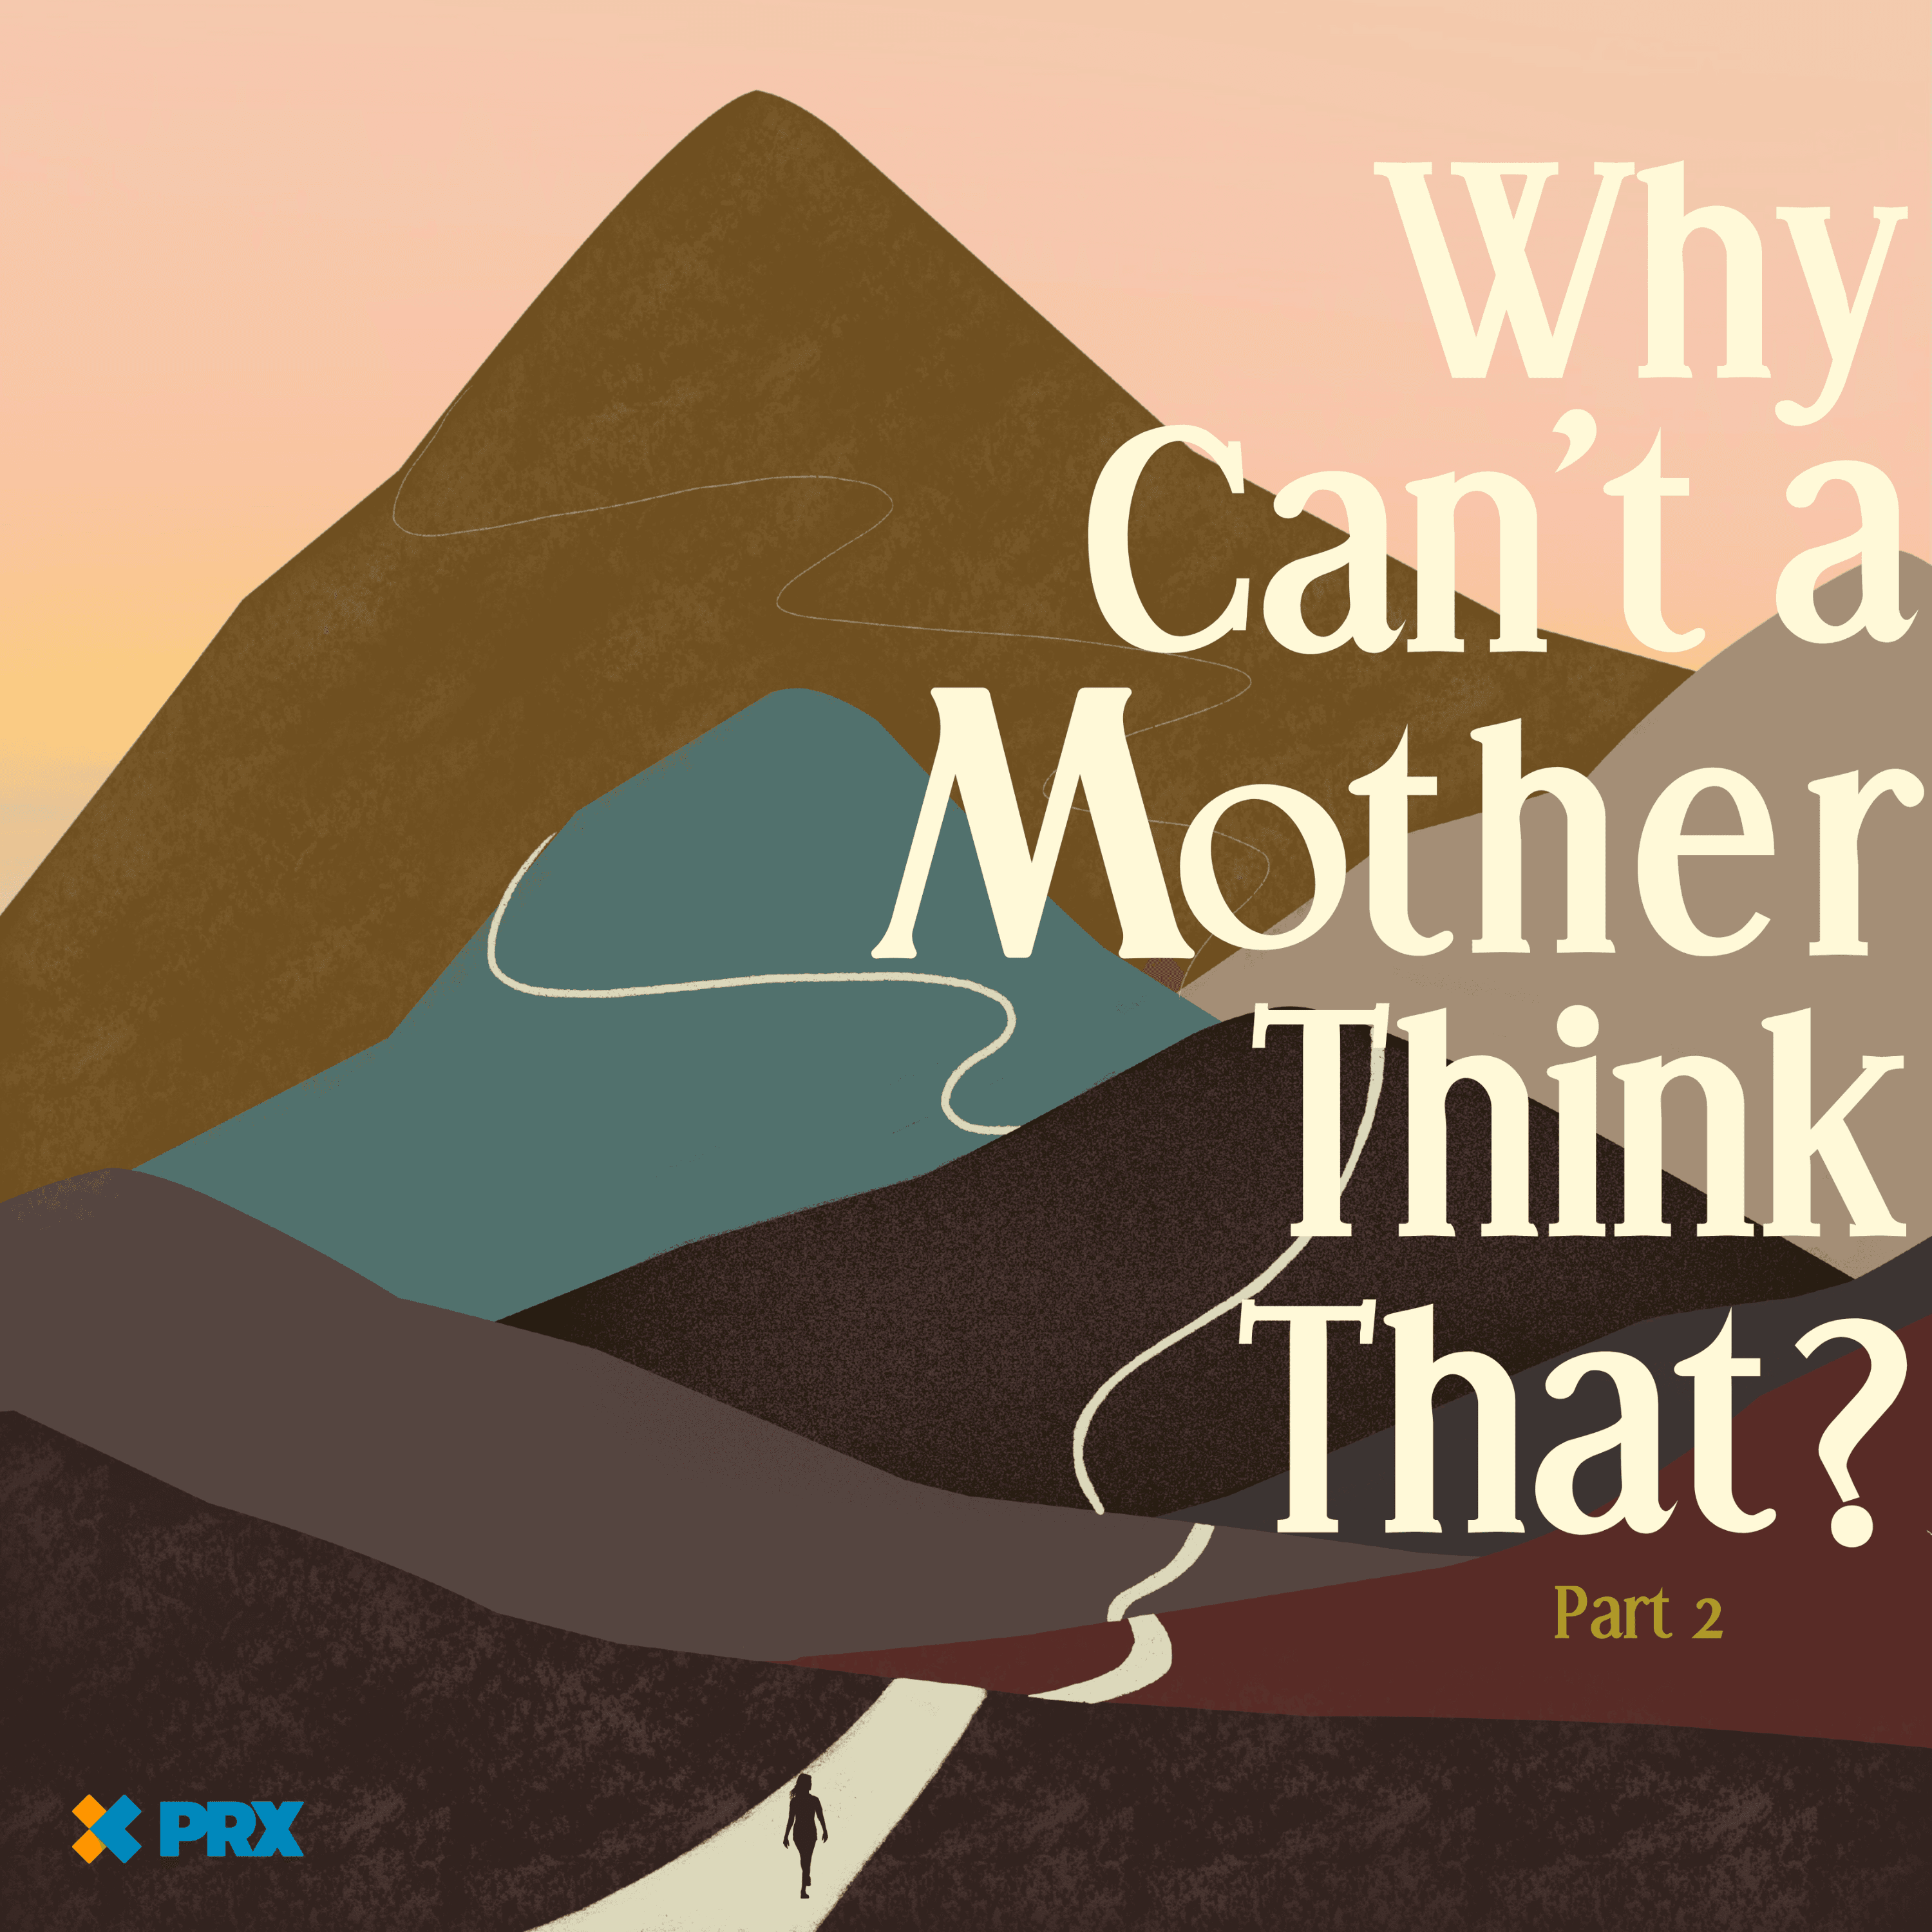 Thumbnail for "Why Can't a Mother Think That? (Anne, Pt. 2)".